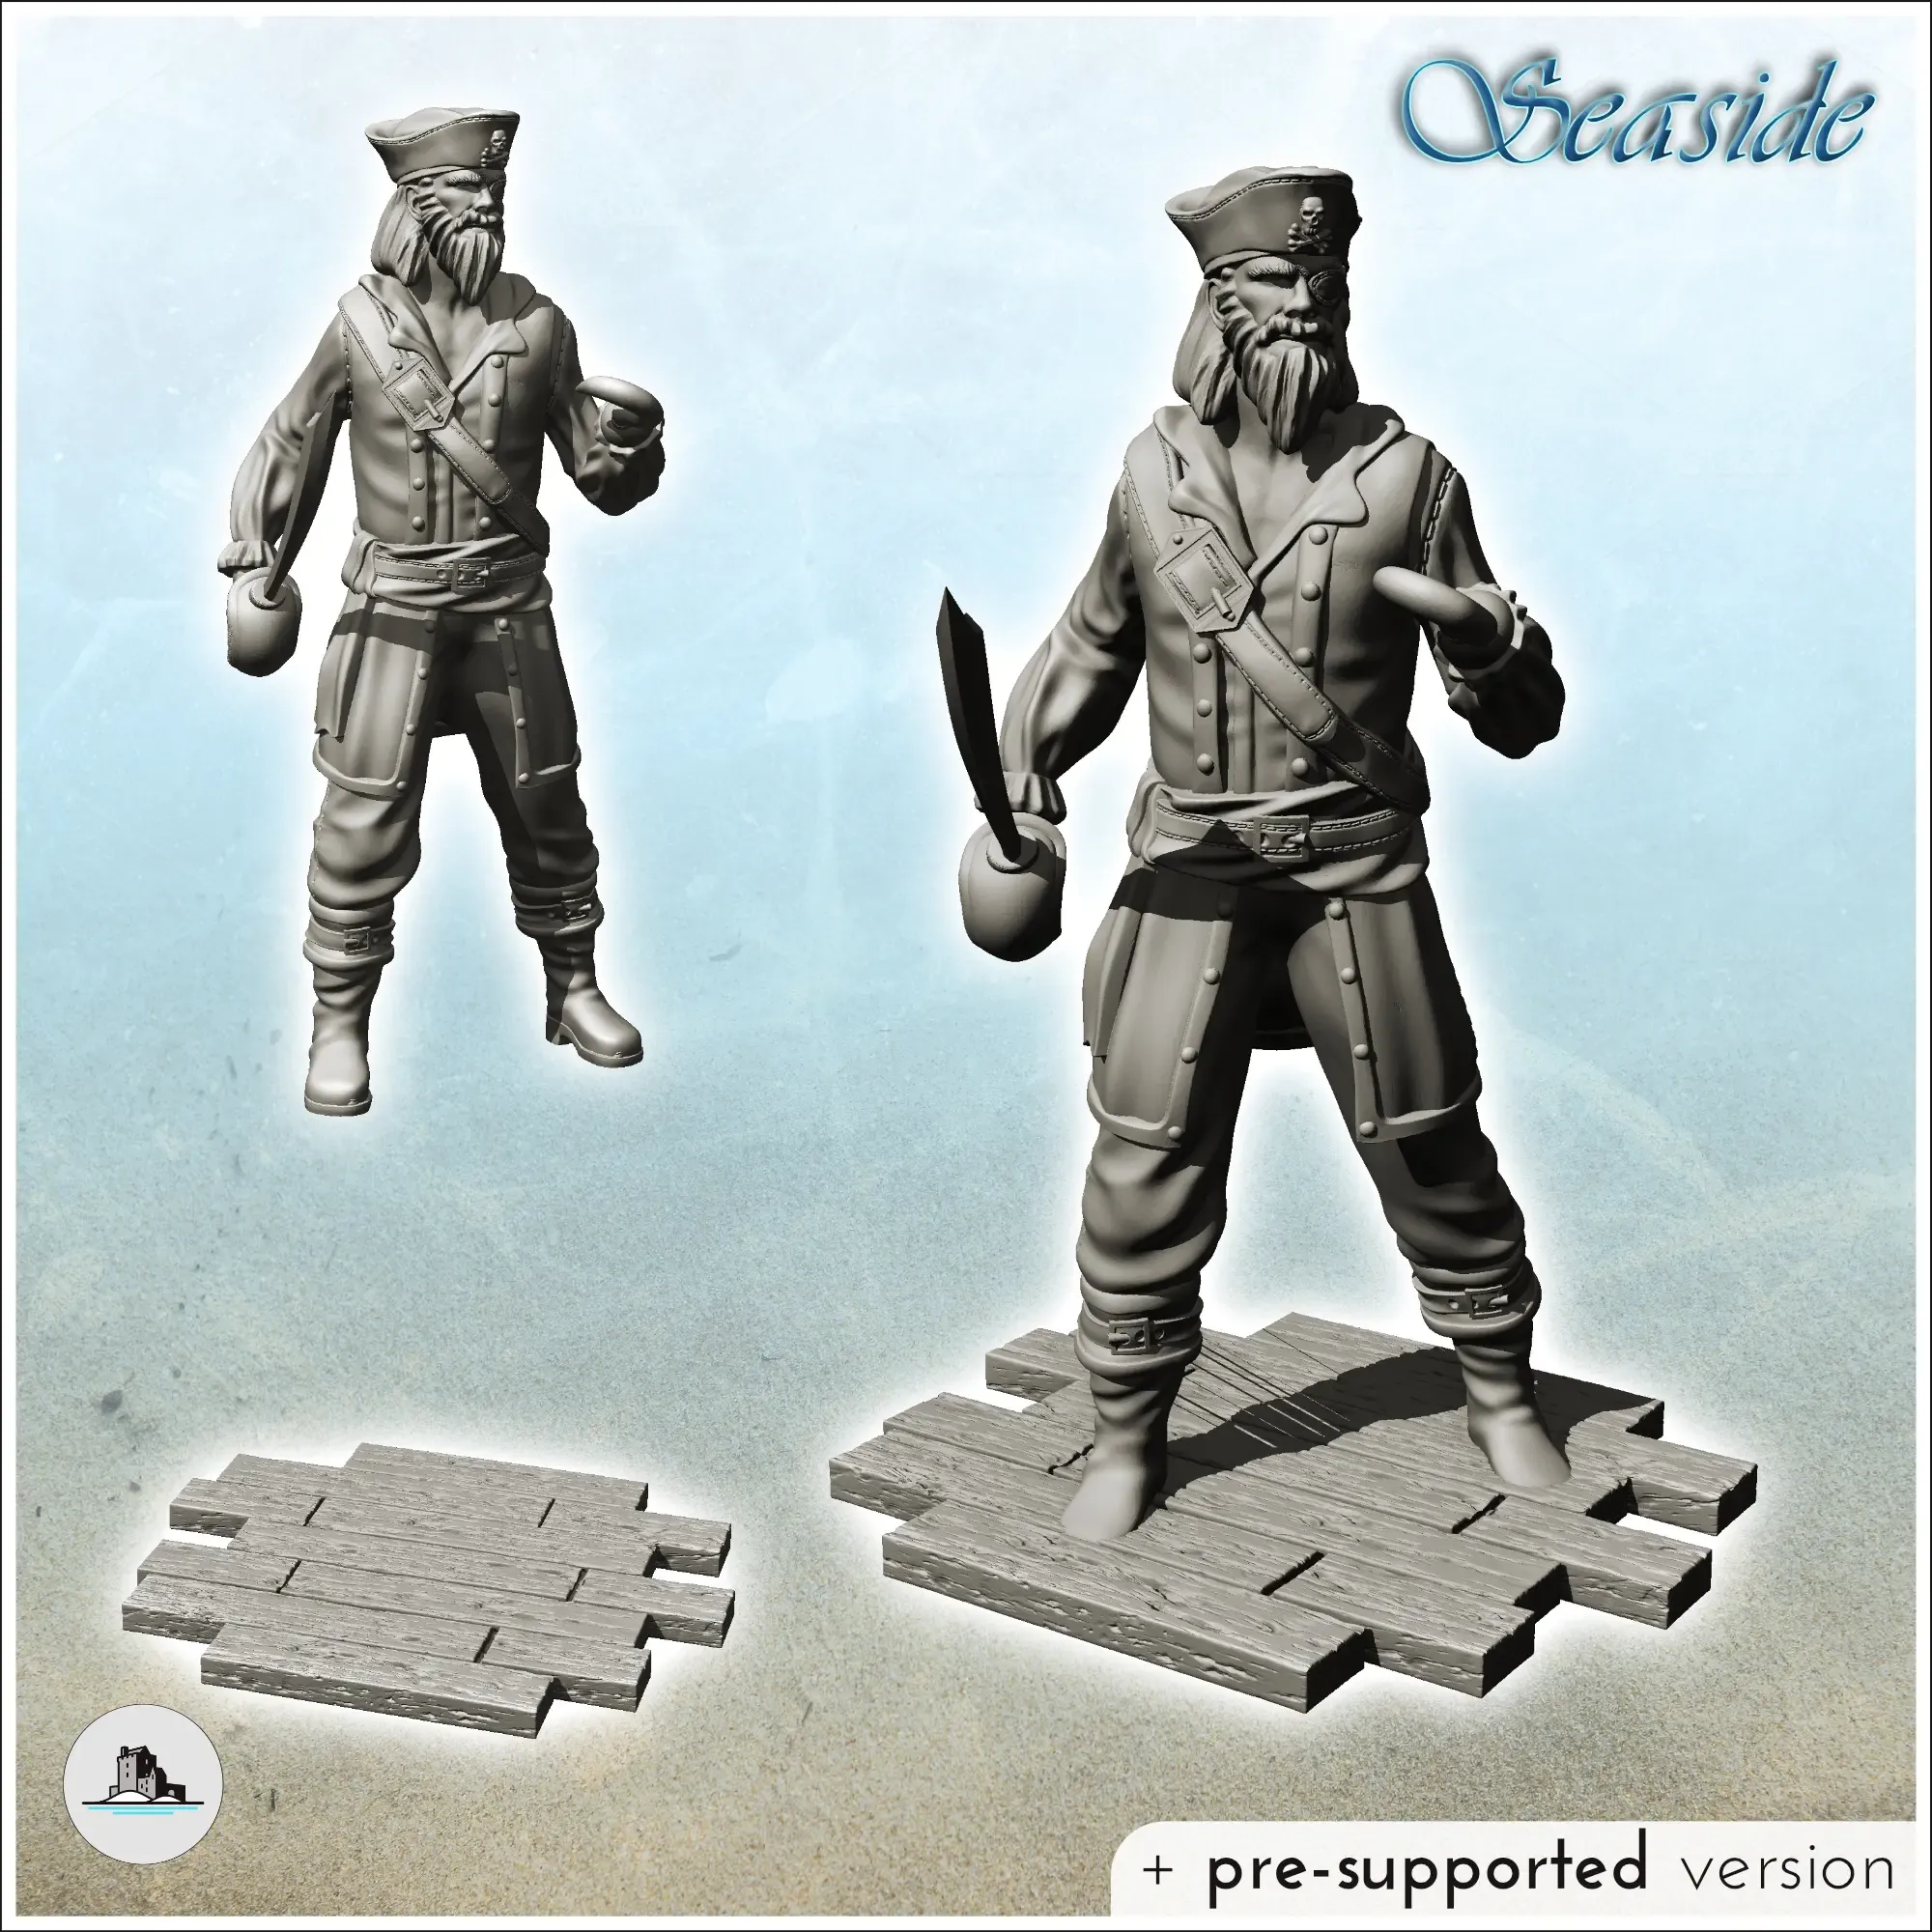 Pirate captain with hook and eye with sword - figure mini